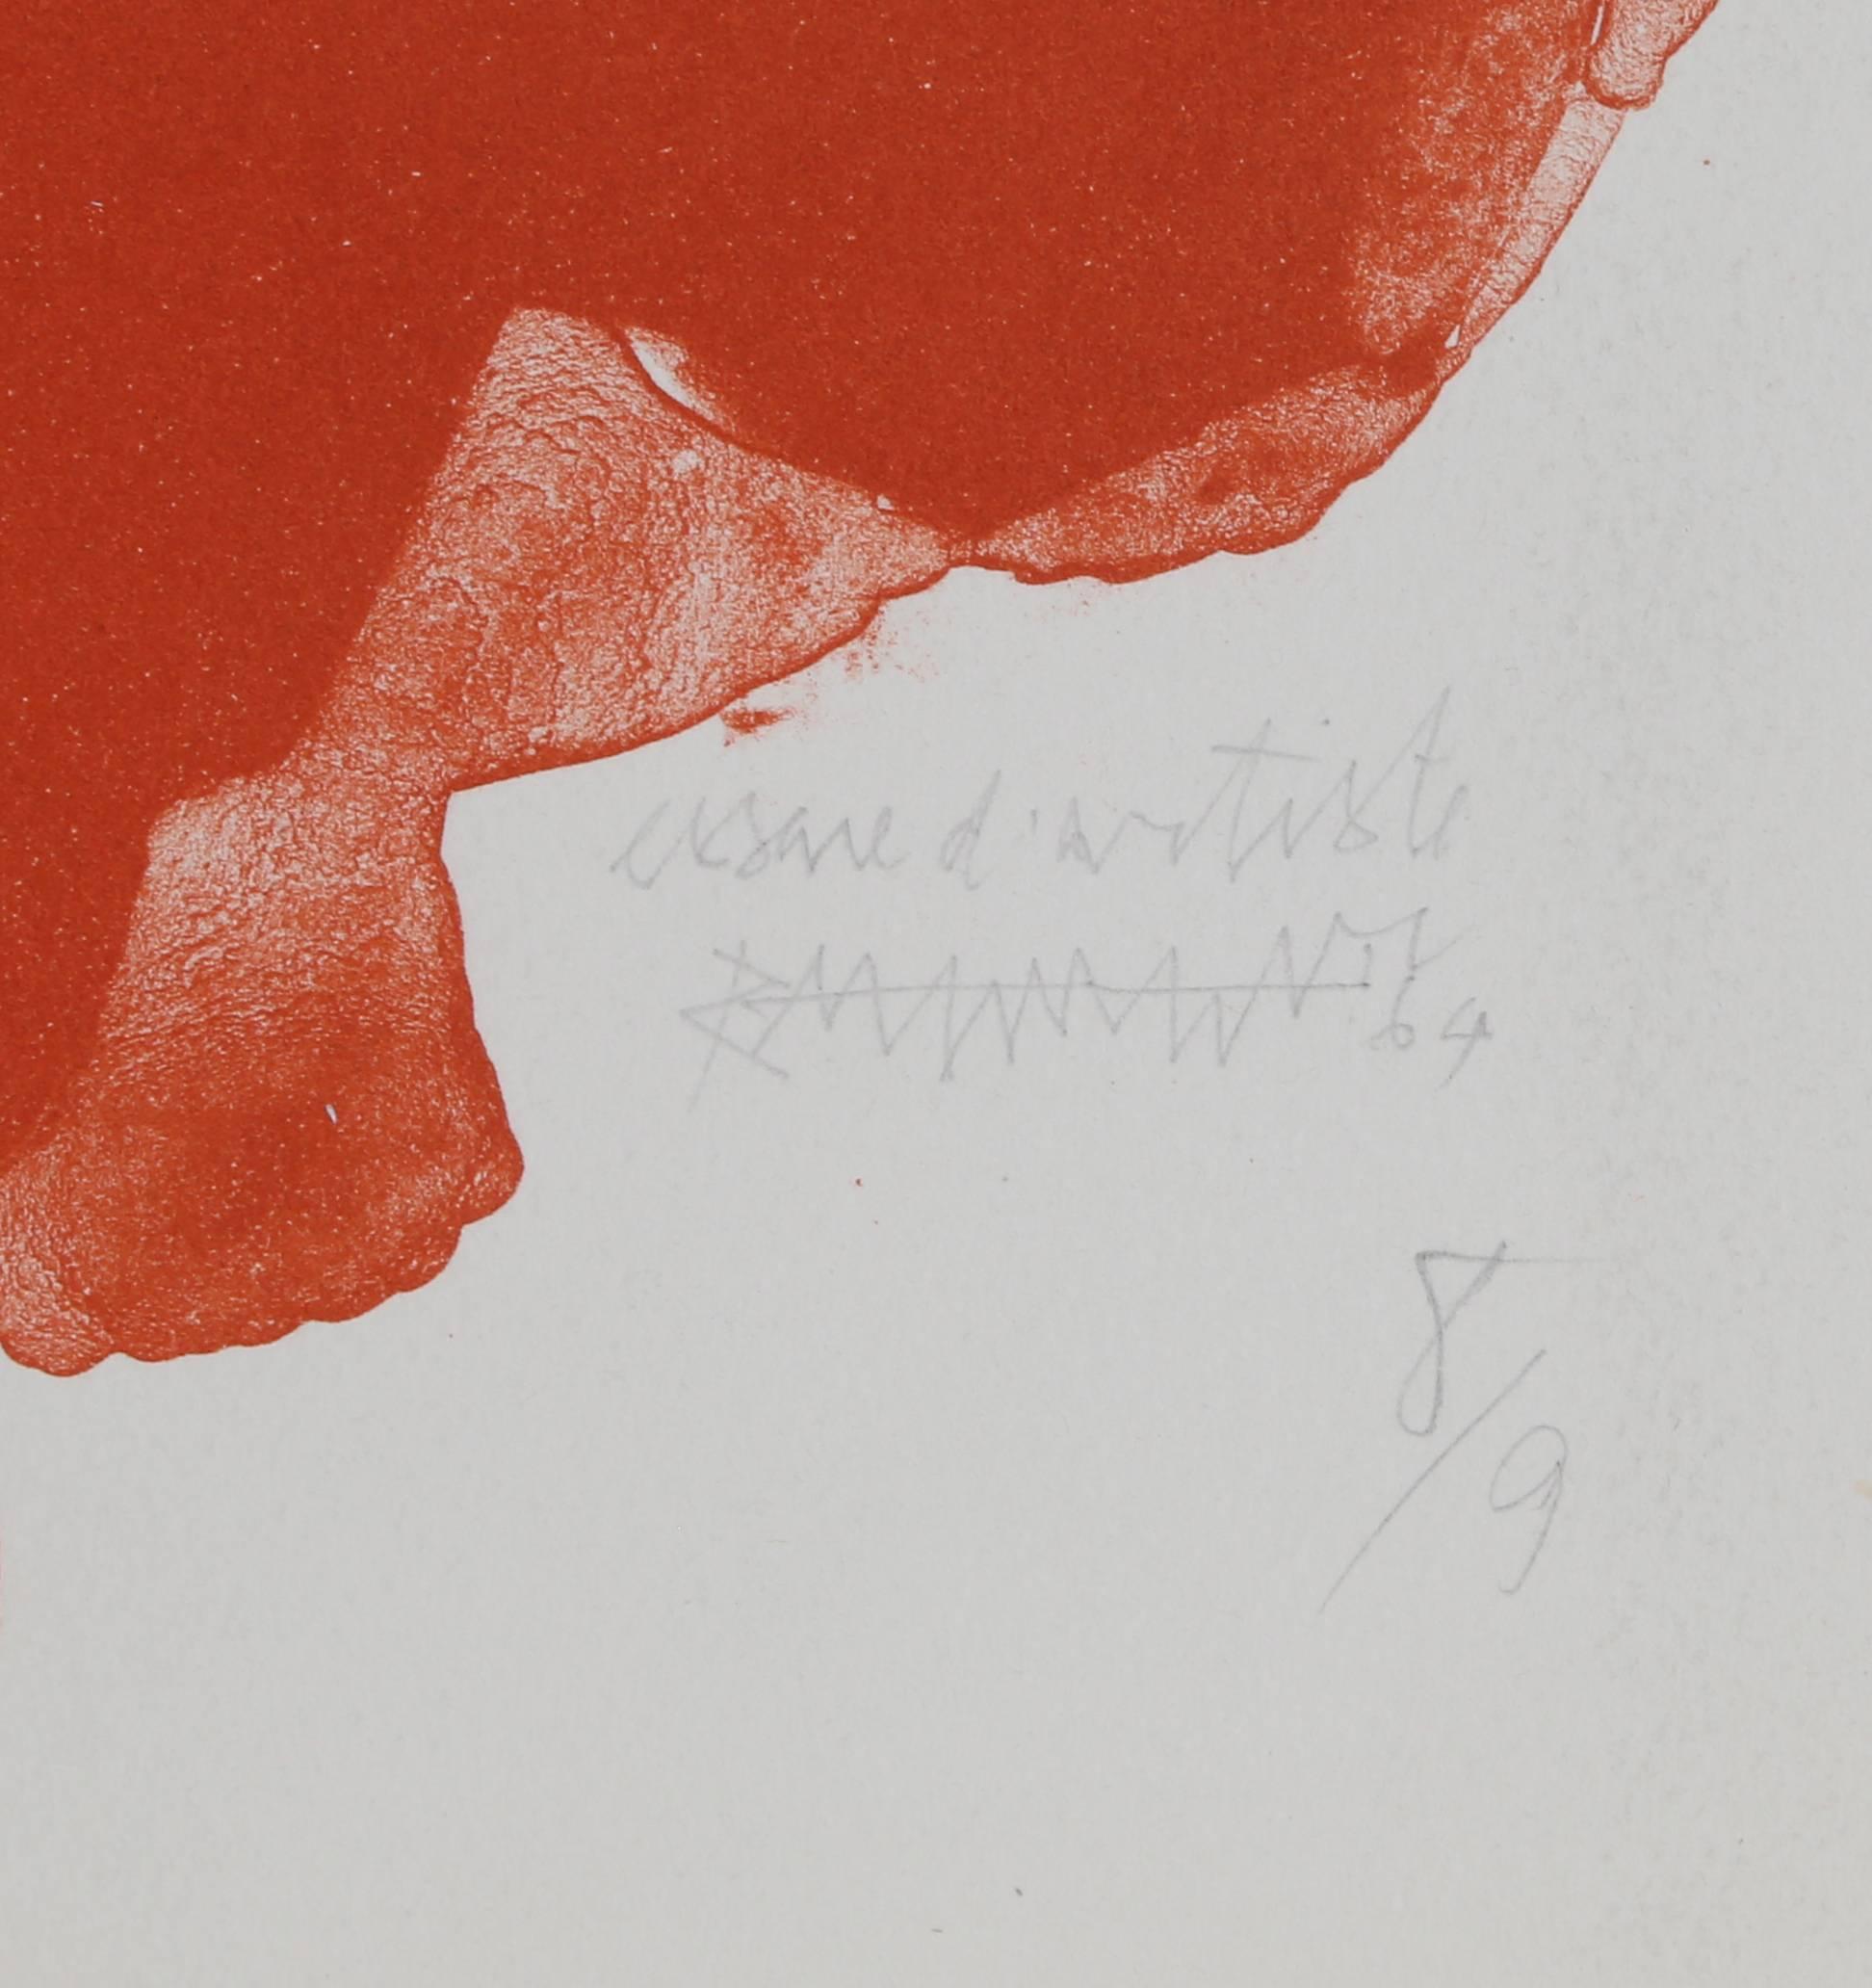 Artist: Abraham Rattner, American (1895 - 1978)
Title: Red Abstract
Year: 1964
Medium: Lithograph, signed, numbered and dedicated in pencil
Edition: 8/9 Artist's Proof
Size: 30  x 21 in. (76.2  x 53.34 cm)